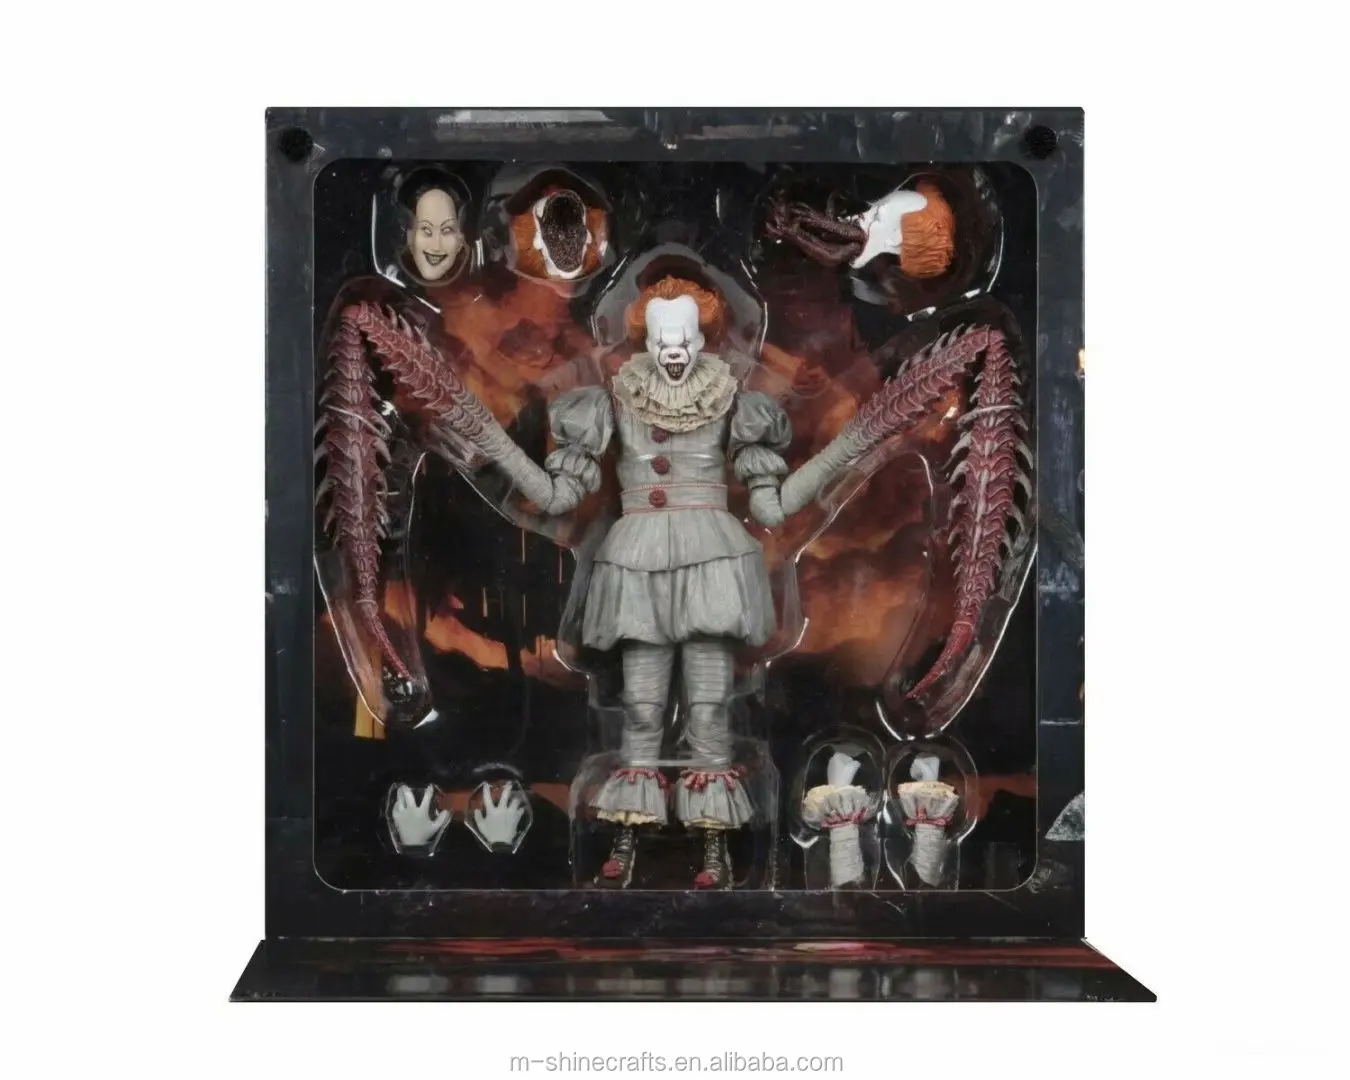 pennywise the clown action figure